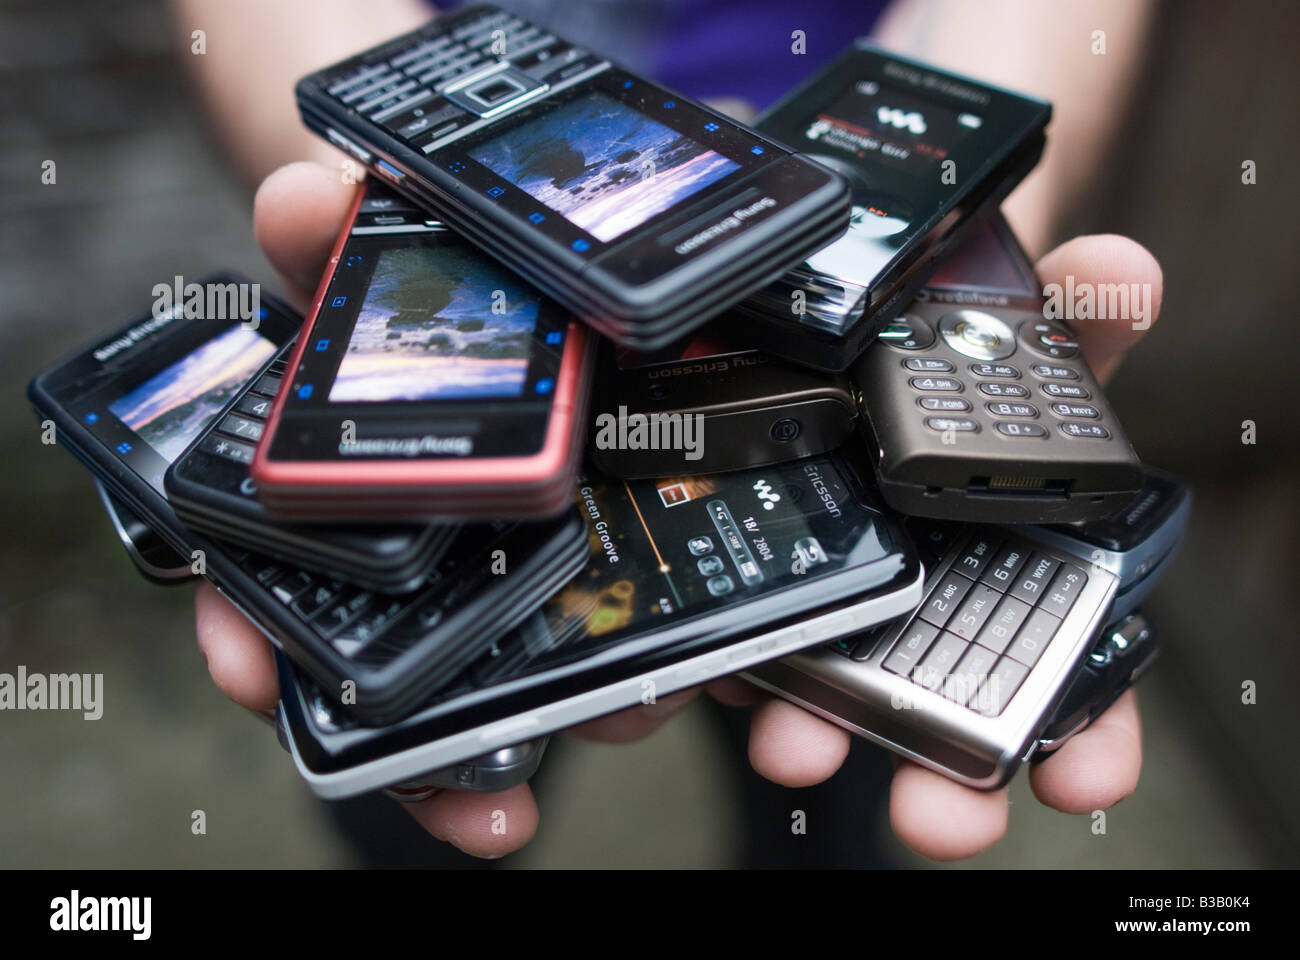 Pile of old   obsolete mobile phones Stock Photo